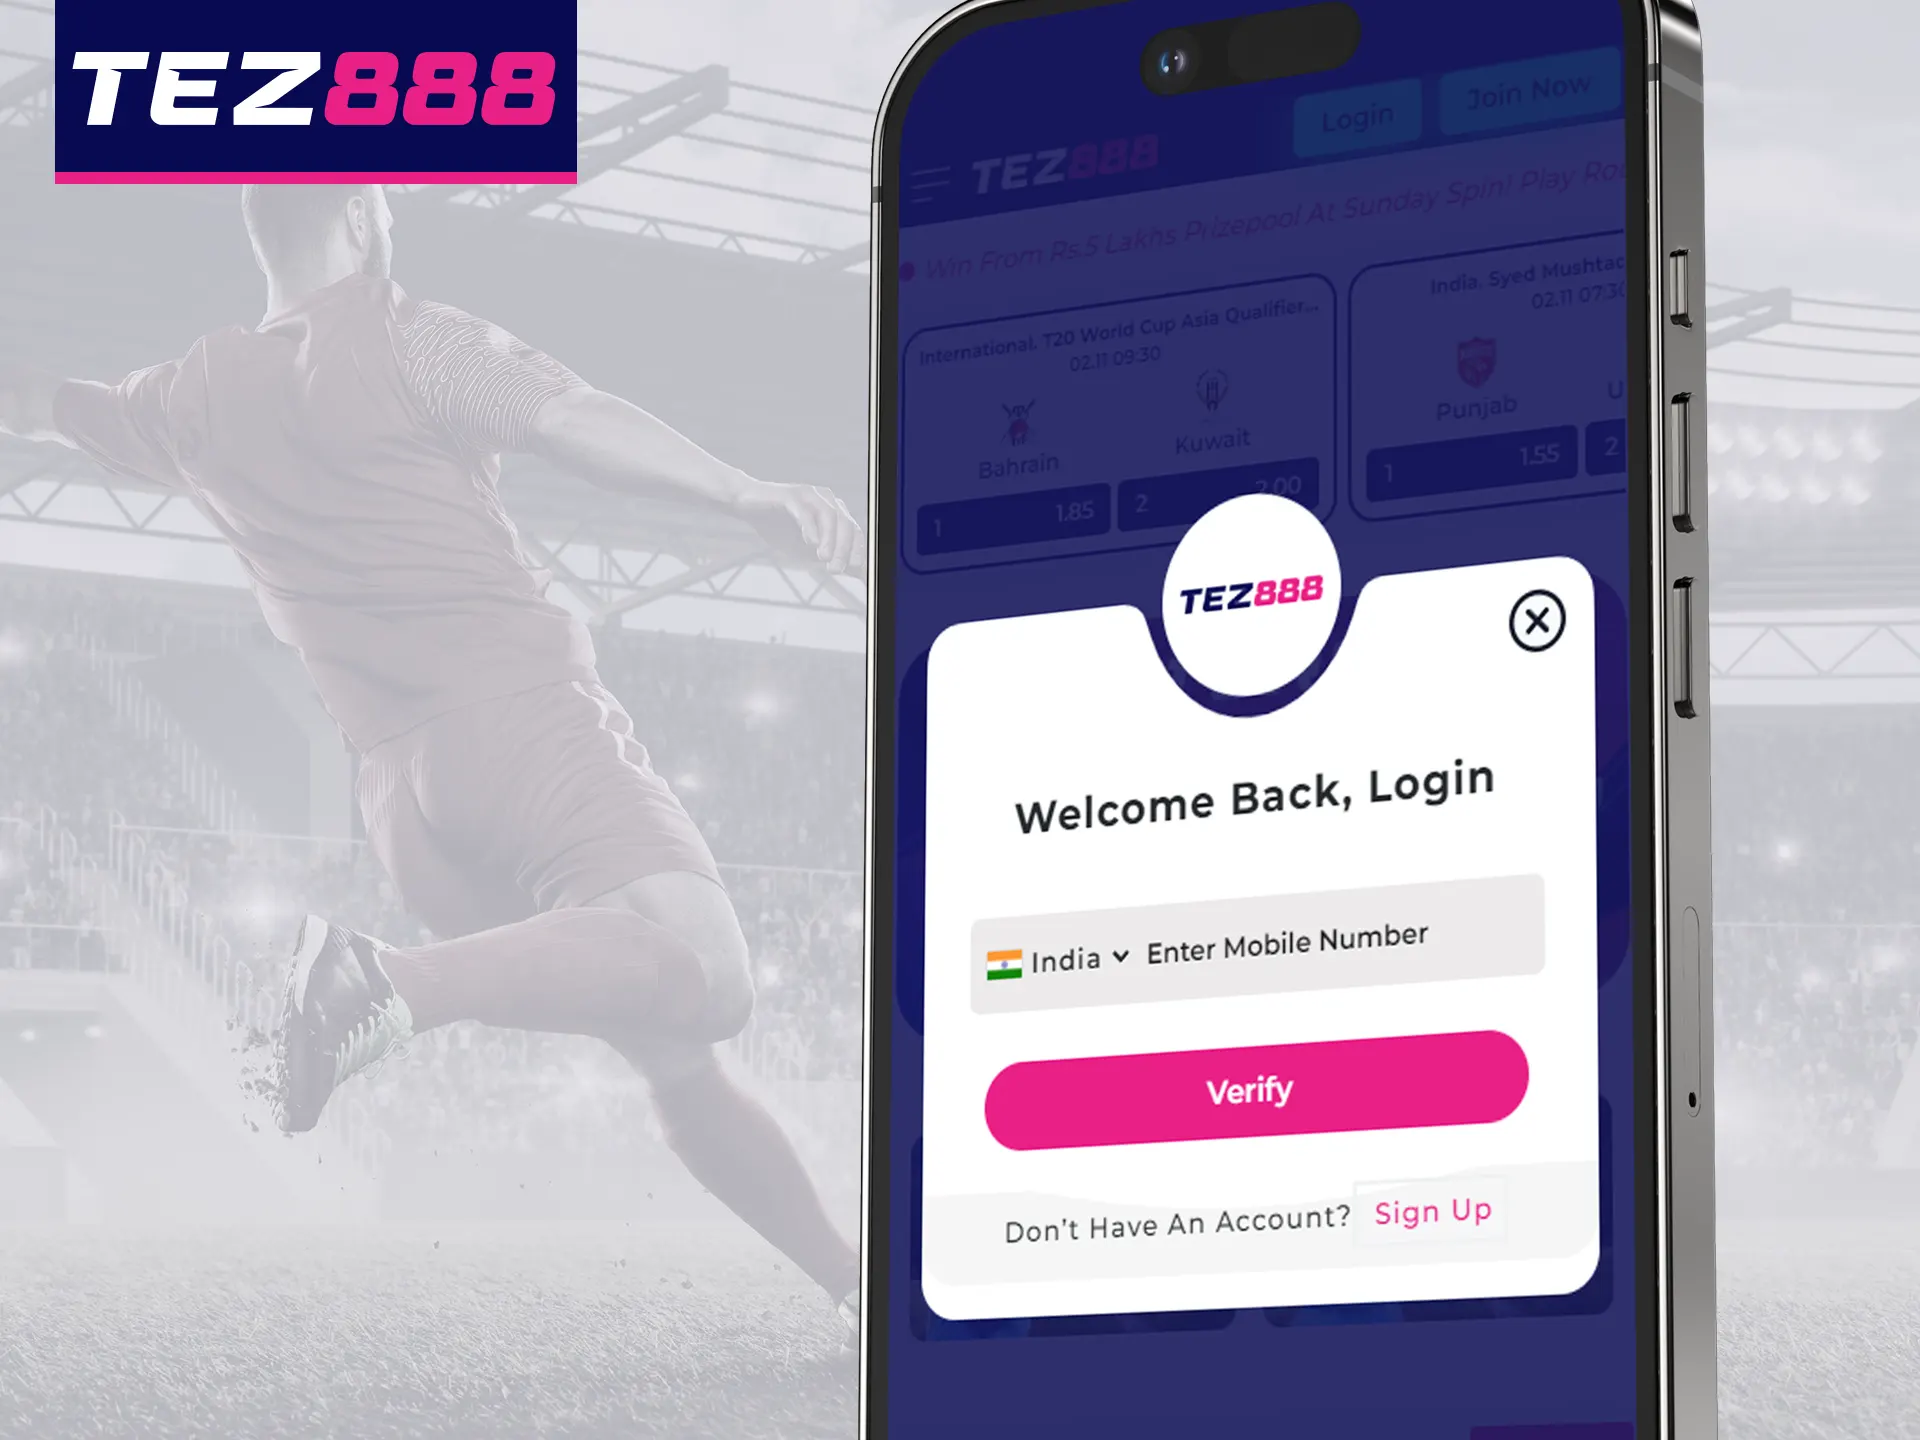 Log in to your Tez888 app account to take advantage of the app's functionality.